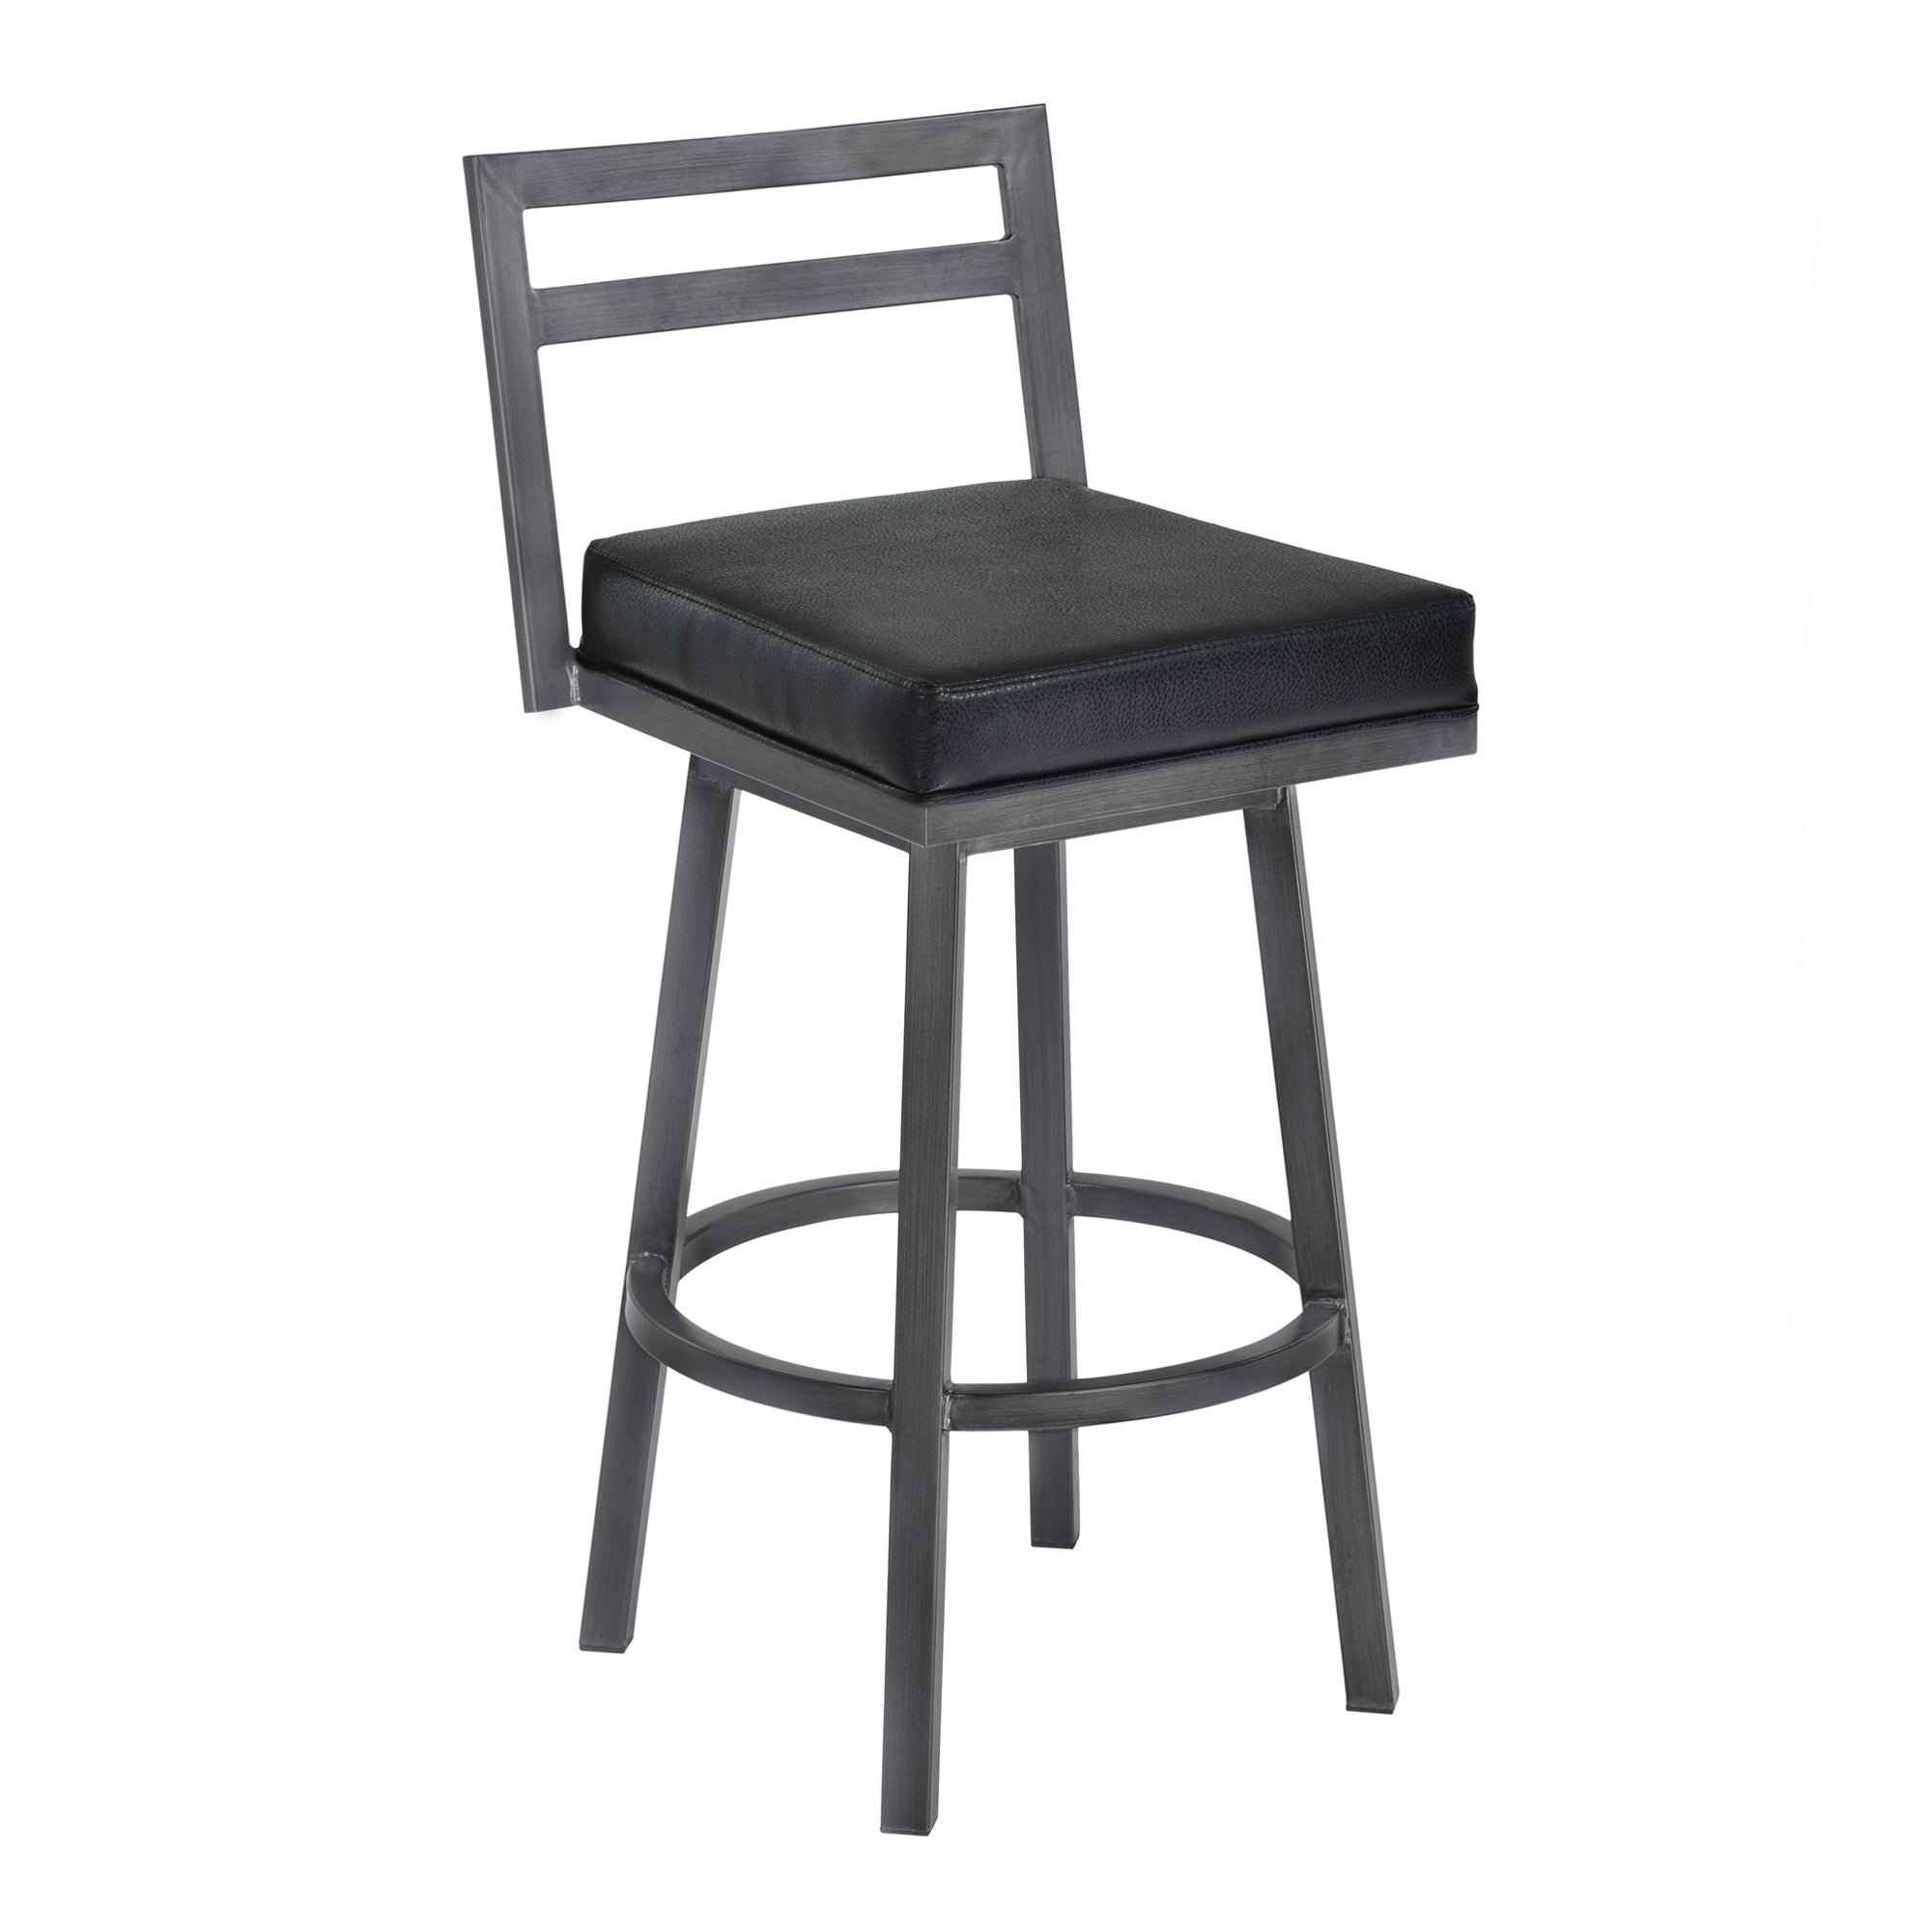 Armen Living LCMOBAMFBL30 Moniq 30 Bar Height Metal Swivel Barstool in Ford Black Faux Leather and Mineral Finish